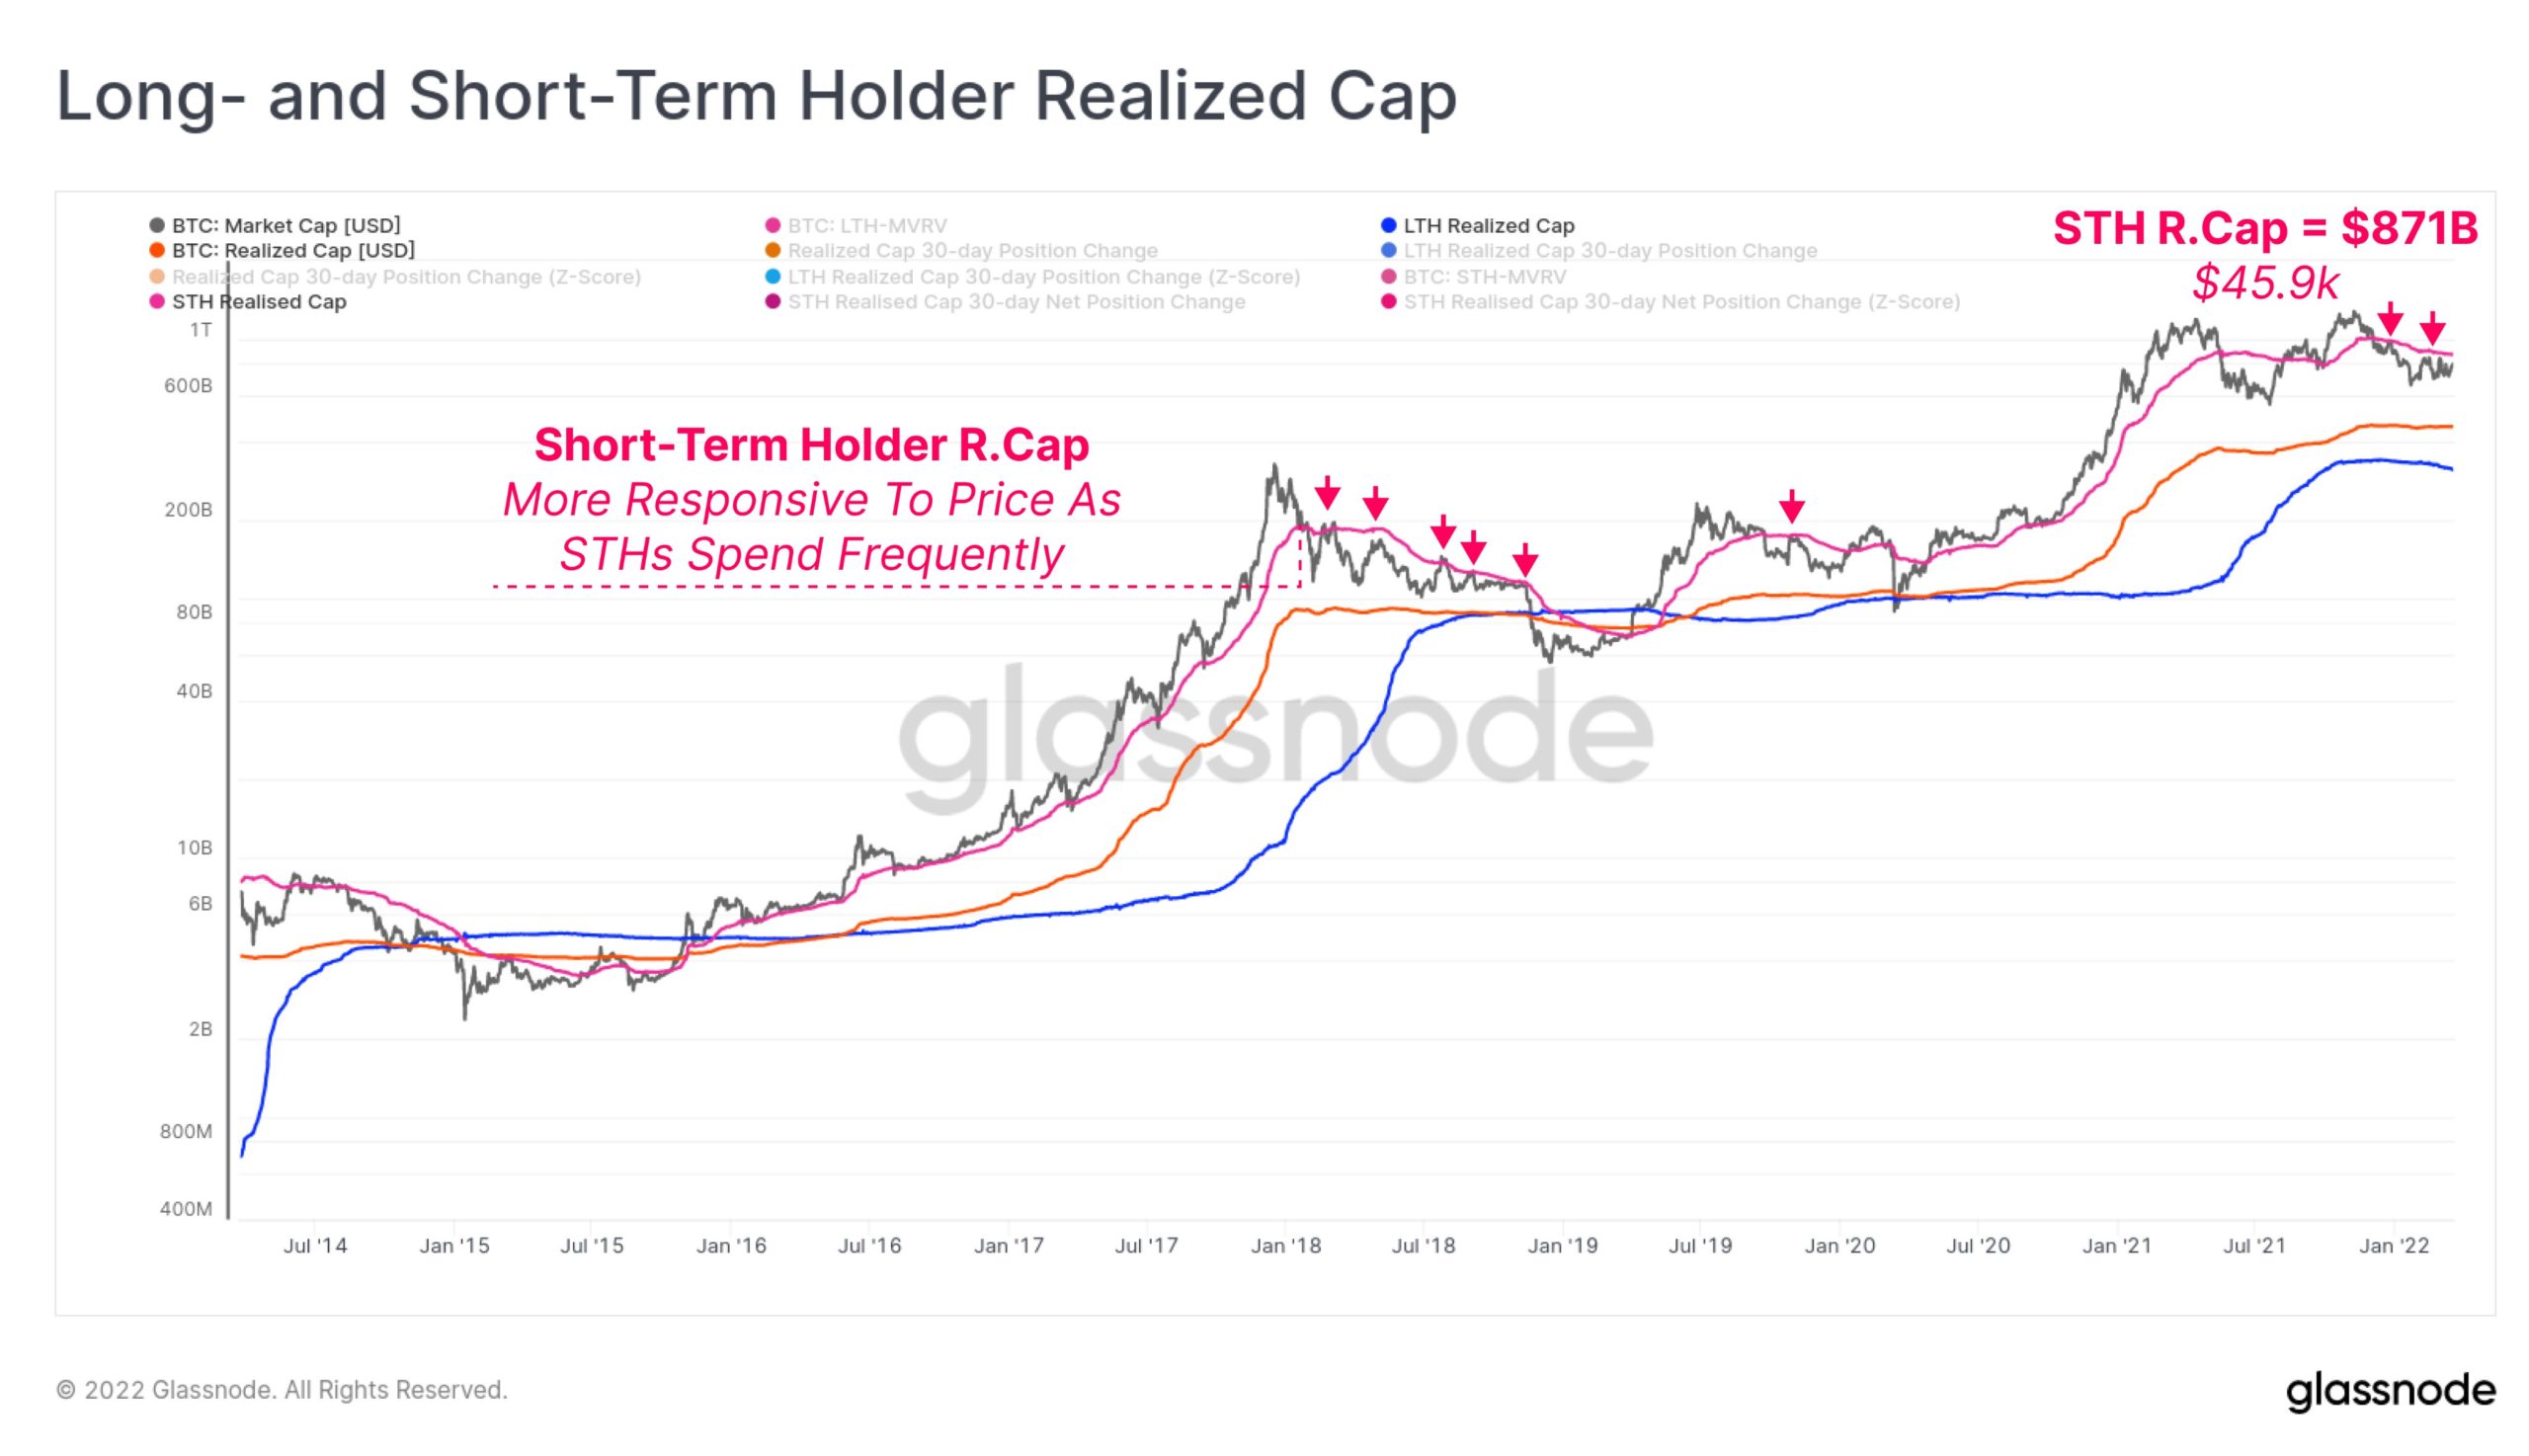 BTC Long and Short-term holders realized cap